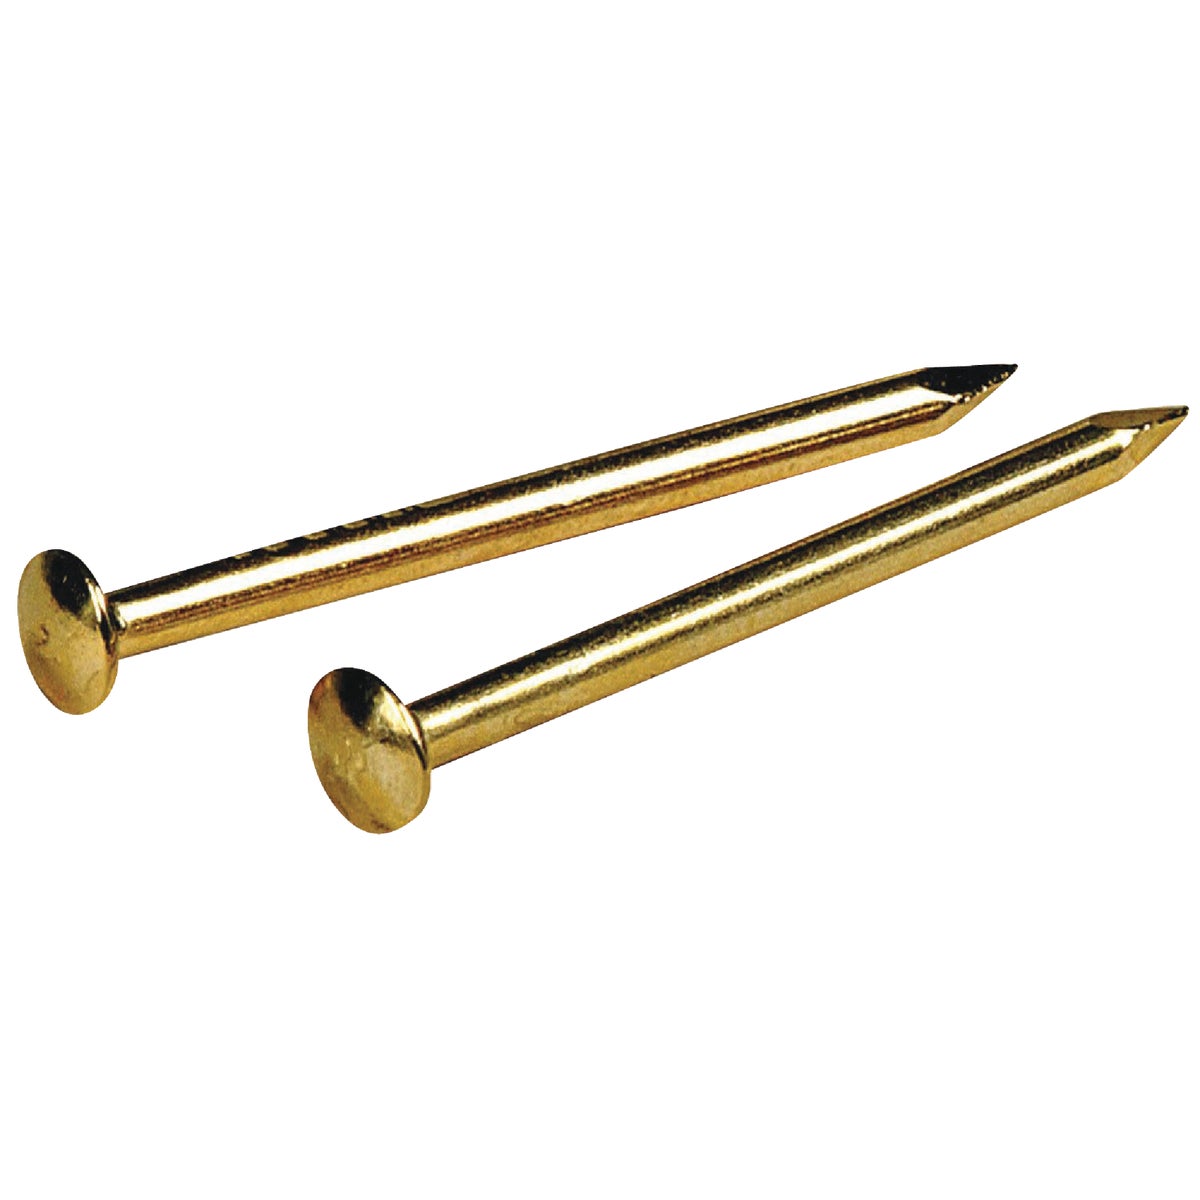 Item 723346, Escutcheon pin is used for any project where small, decorative nails are 